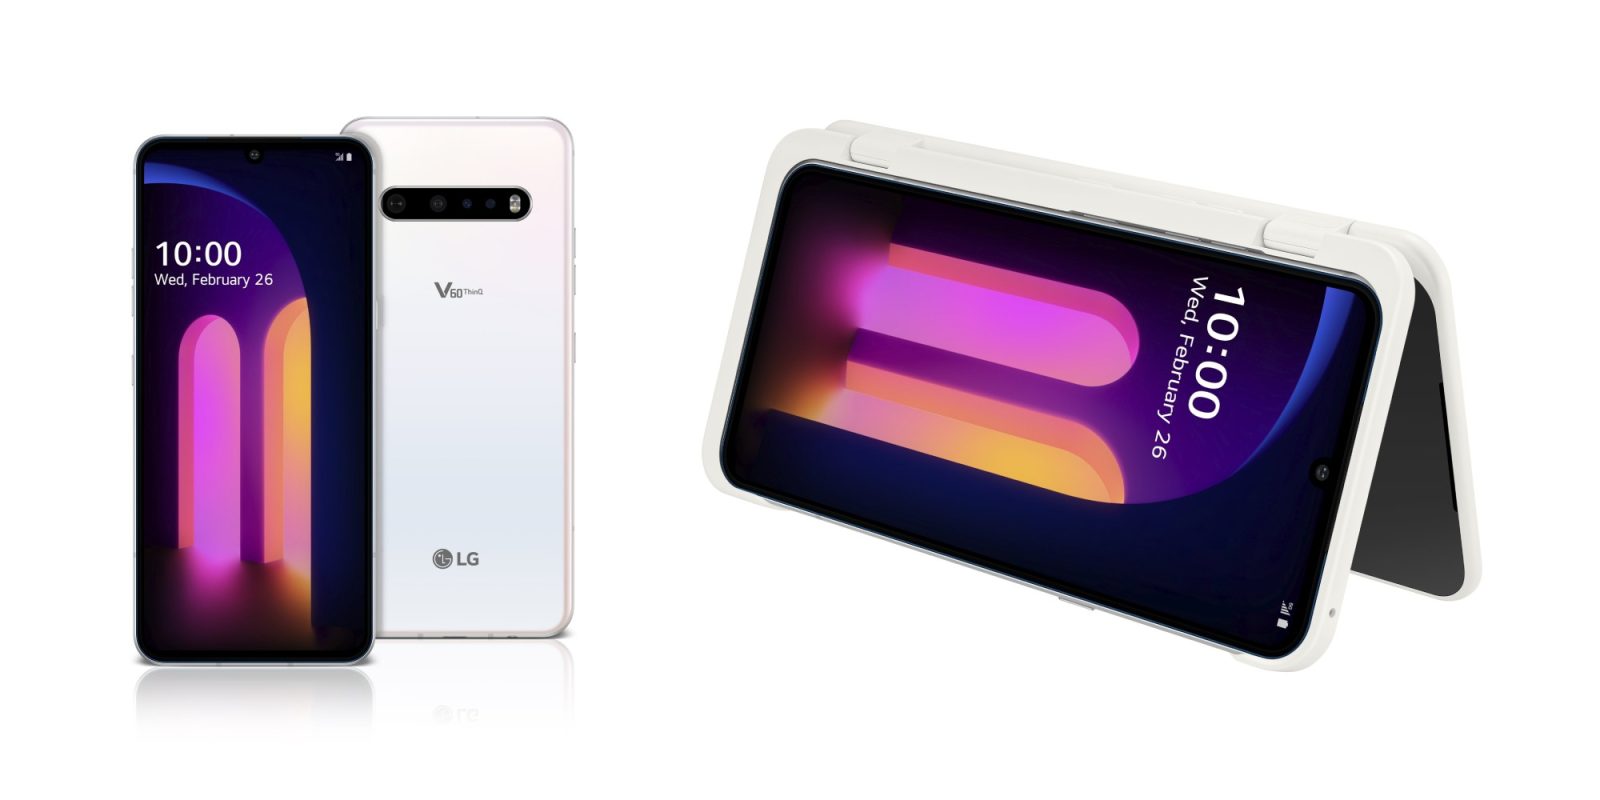 LG V60 ThinQ 5G hands-on roundup: not quite "wow factor" - 9to5Google